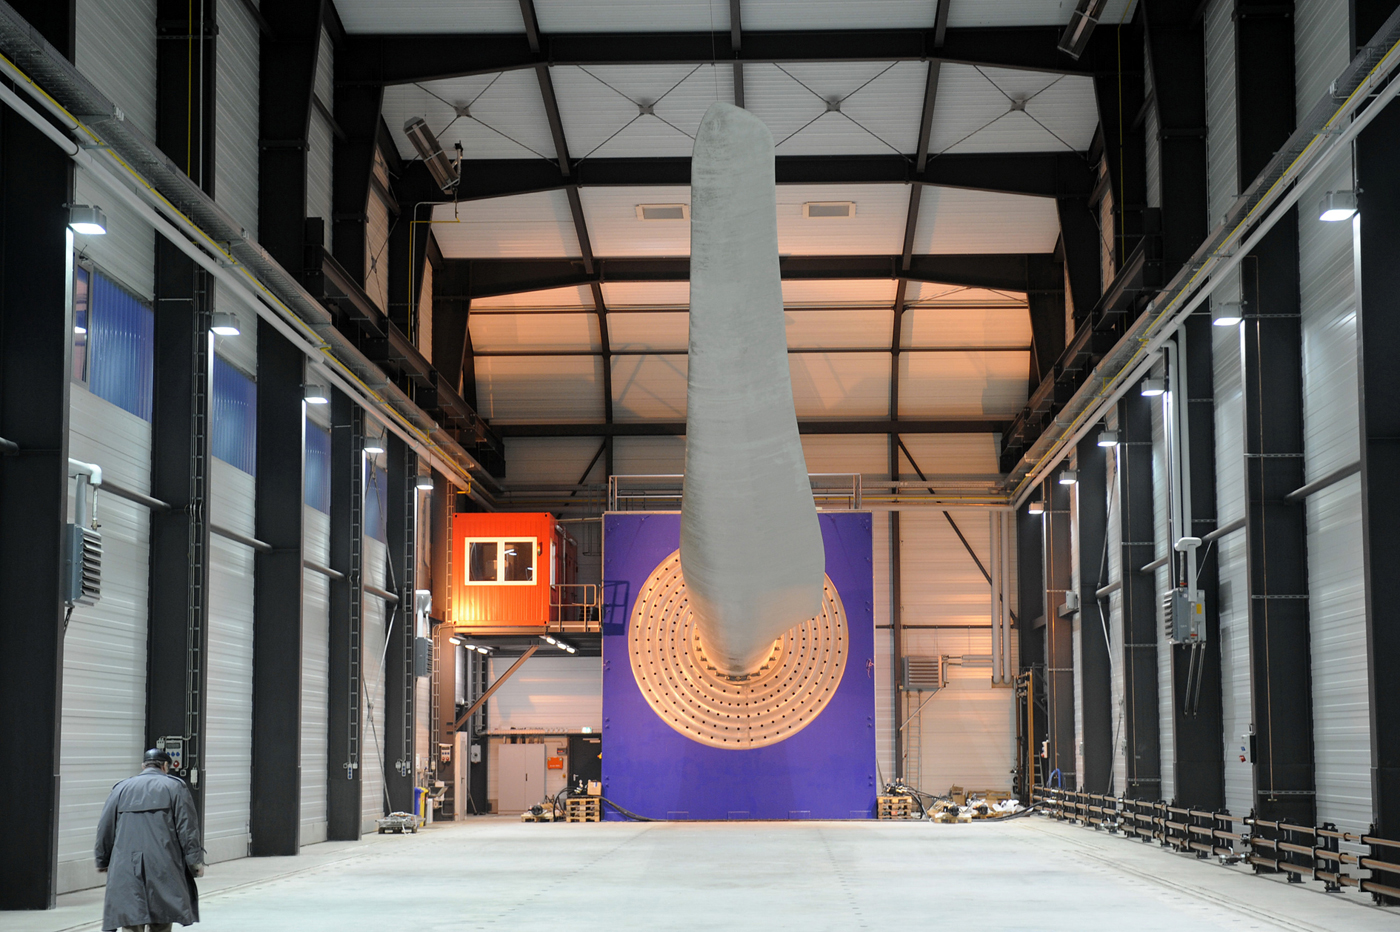 Picture: Test of rotor blades